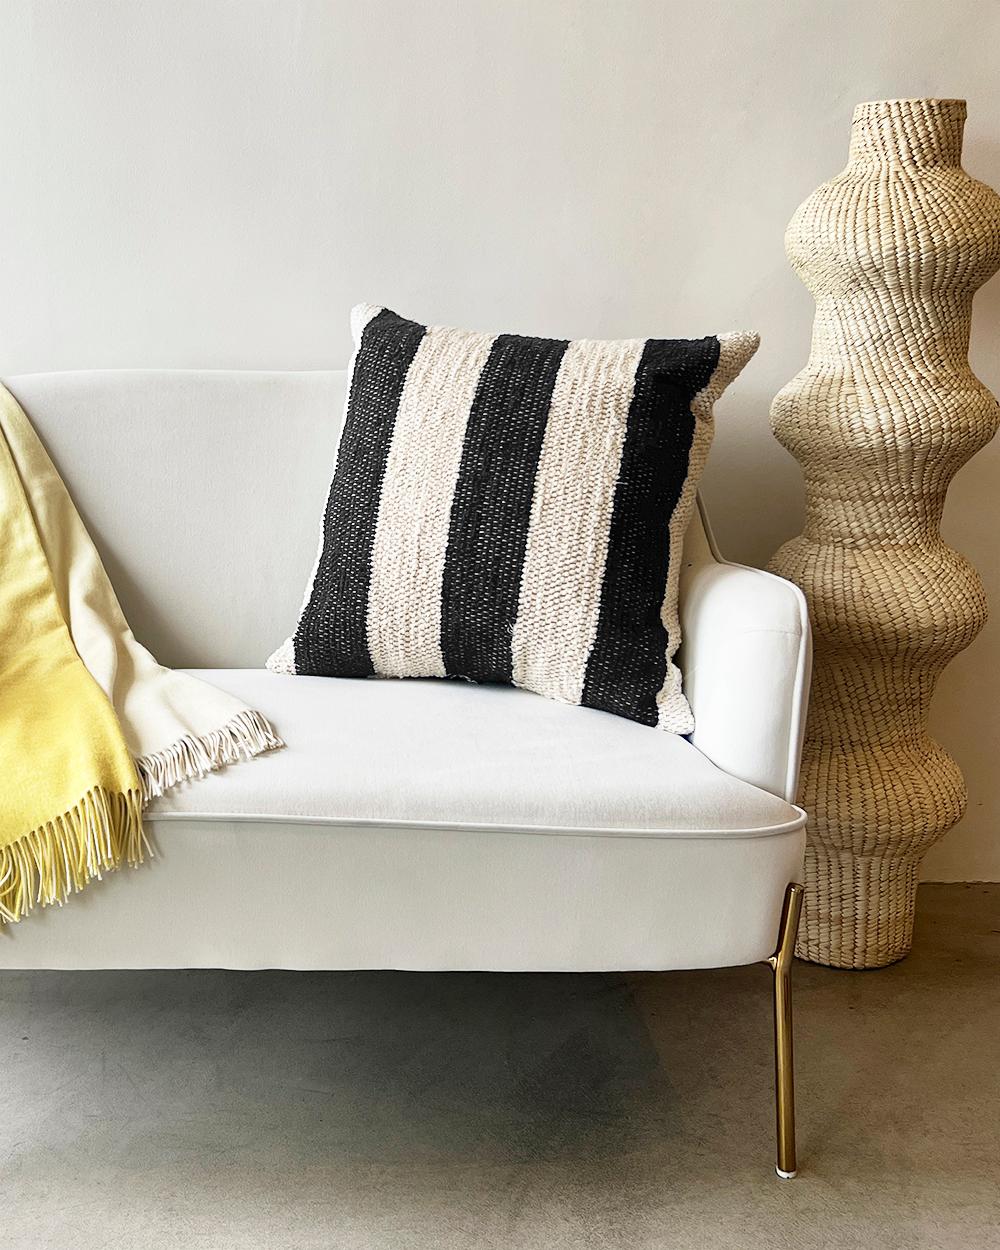 A geometric textured throw pillow for your couch or bed
This black and cream cotton throw pillow is made from thick handwoven cotton and is perfect for a high traffic area like the living room couch. Put two matching pillows on either side of the